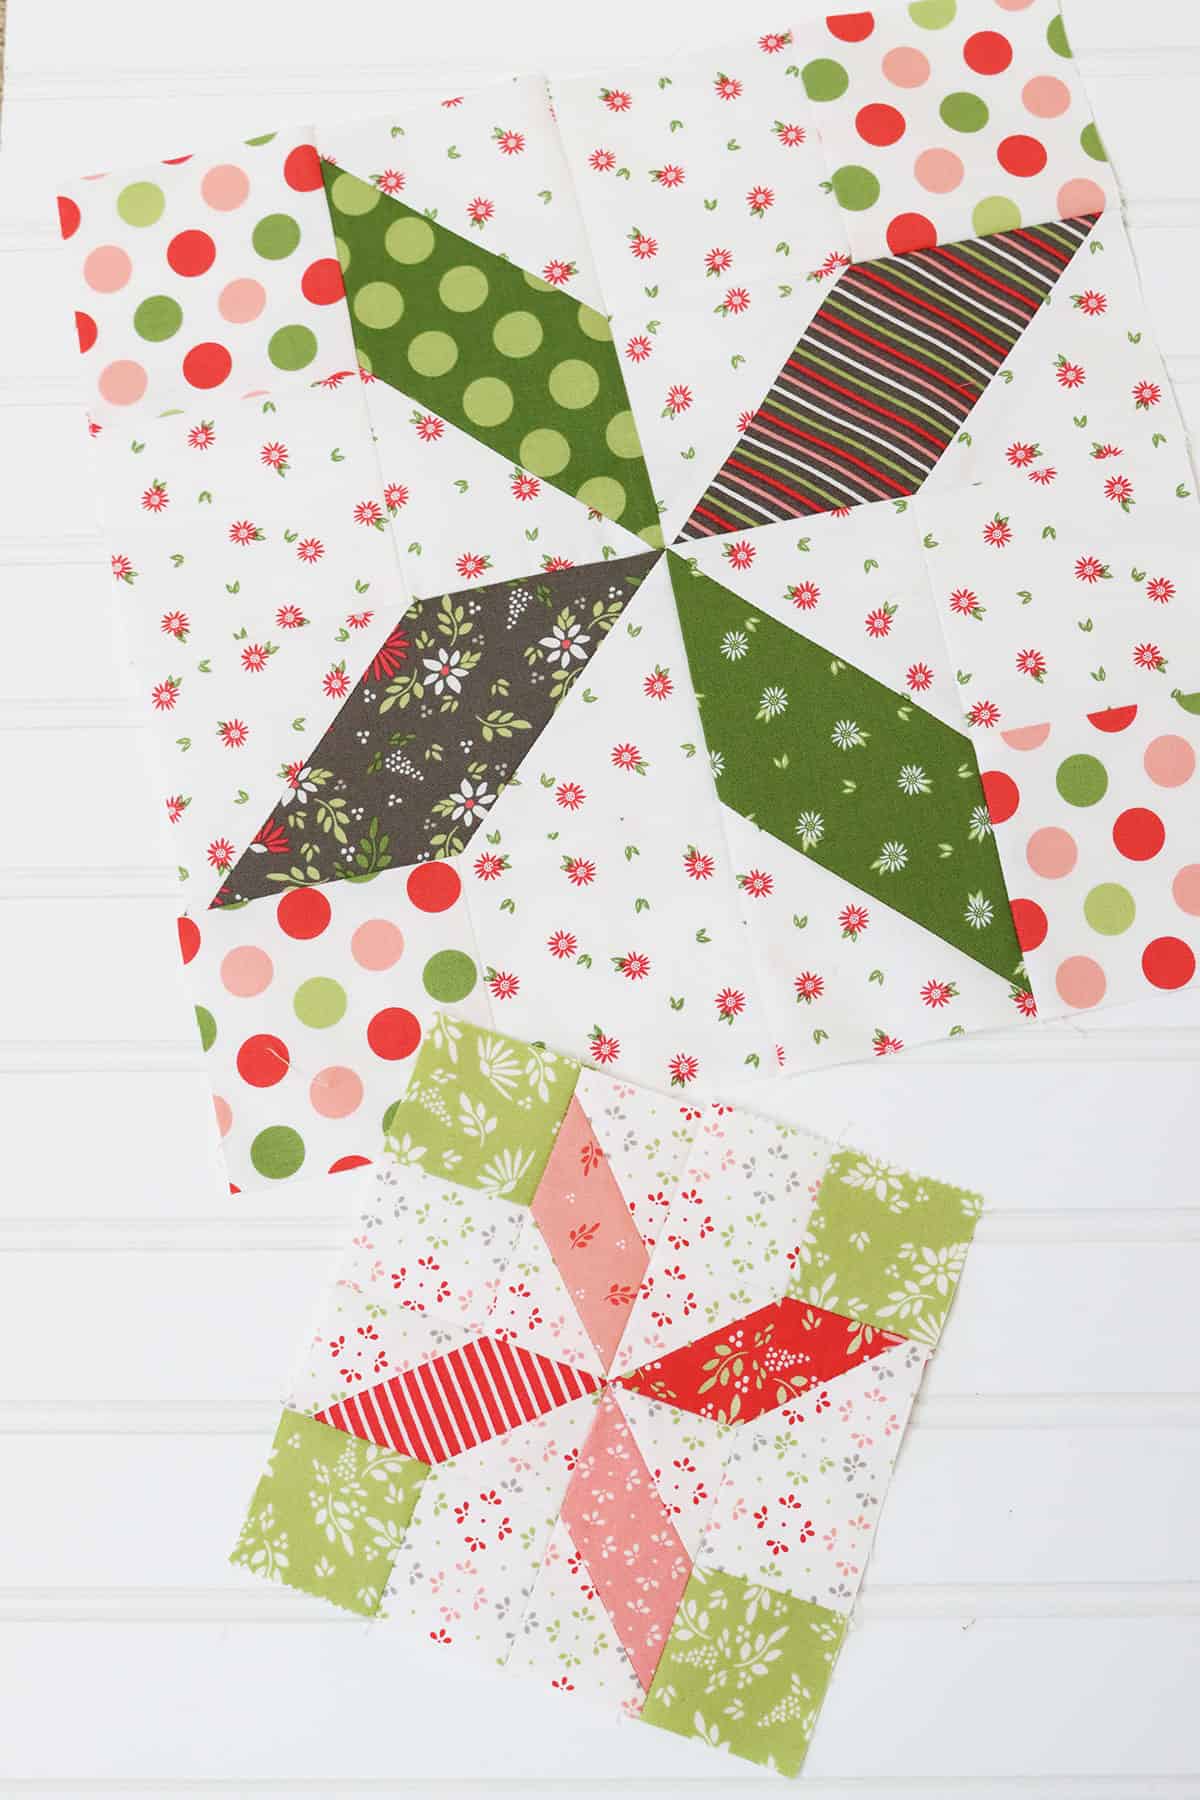 Quilt Block of the Month February 2023 featured by Top US Quilt Blog, A Quilting Life